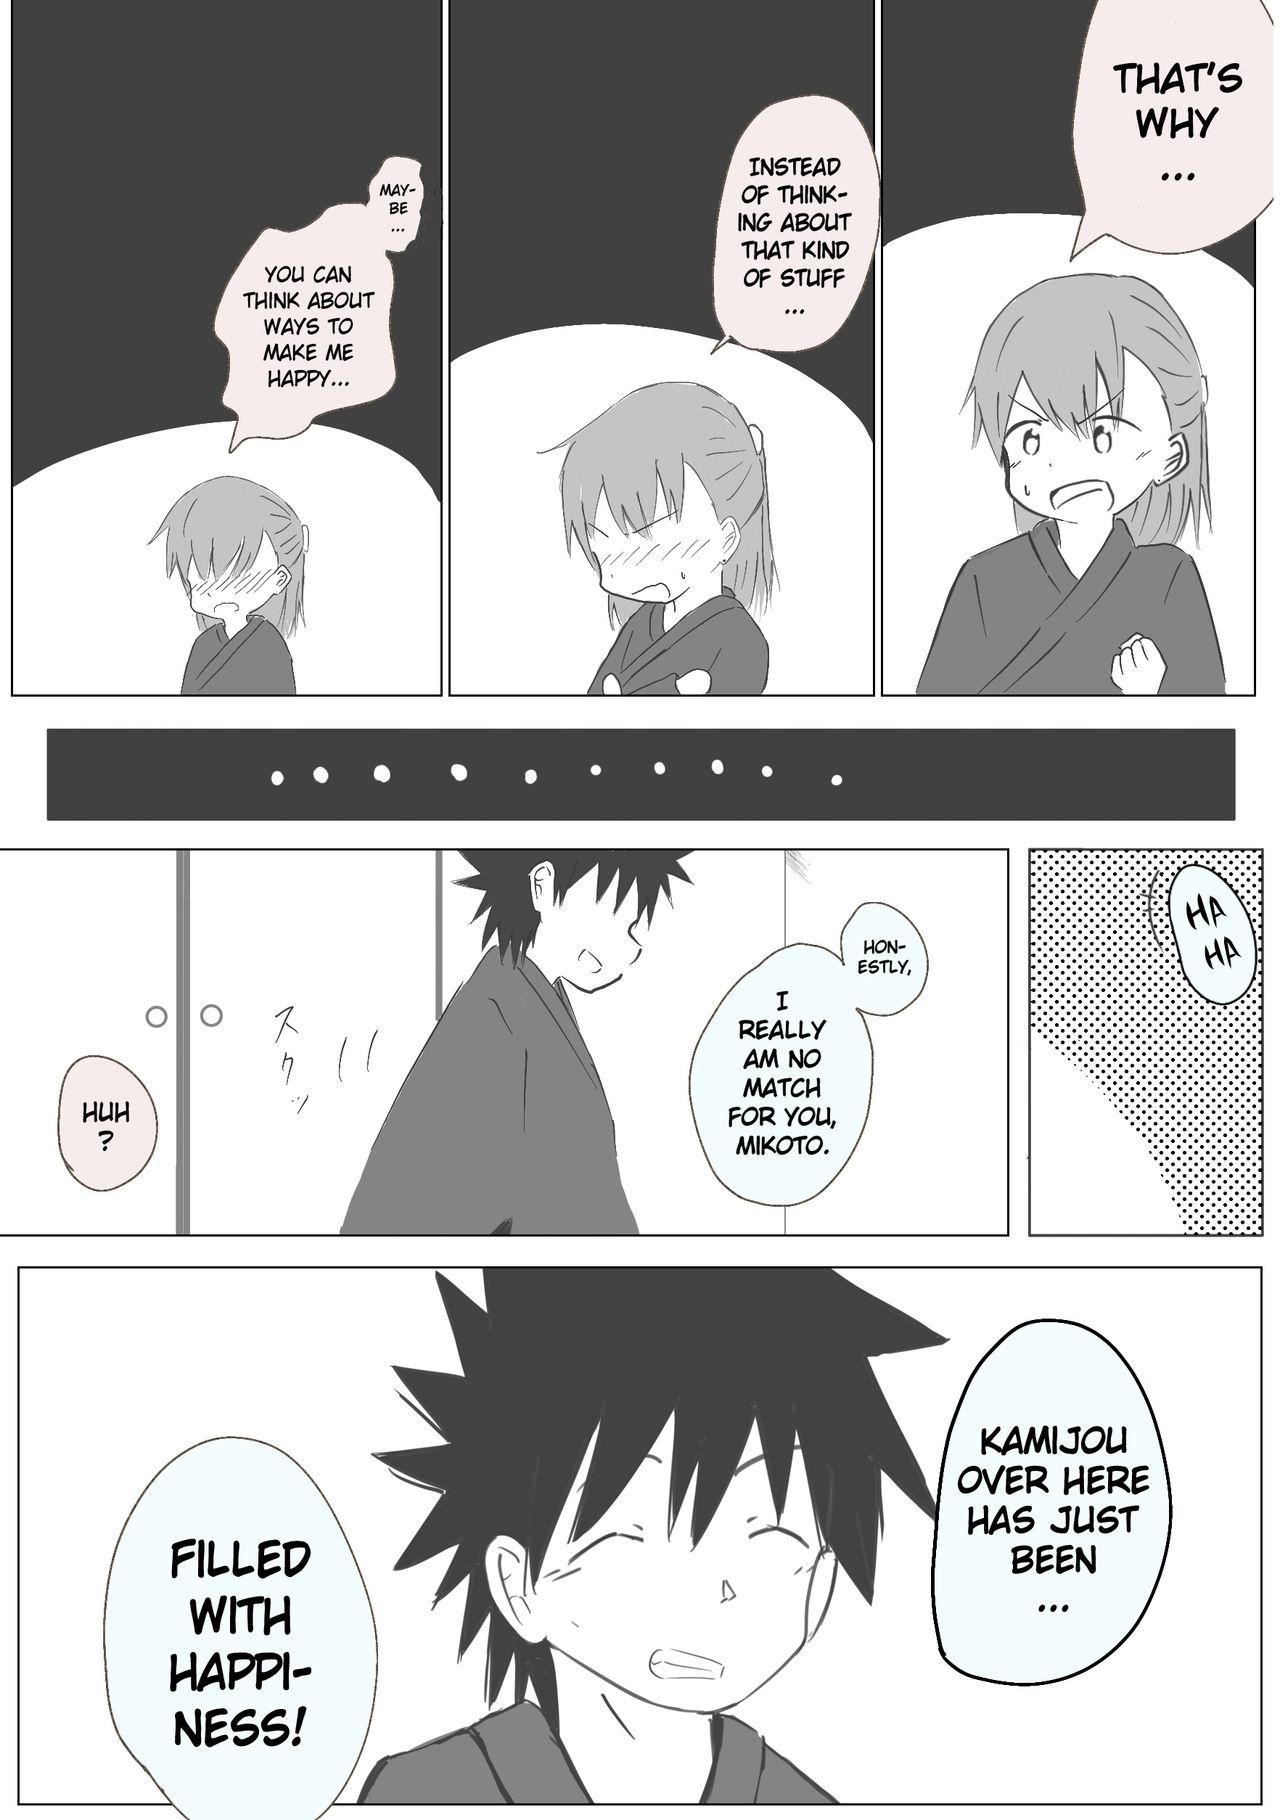 Village Kamikoto's First Night as Newlyweds - Toaru majutsu no index | a certain magical index Gay 3some - Page 5